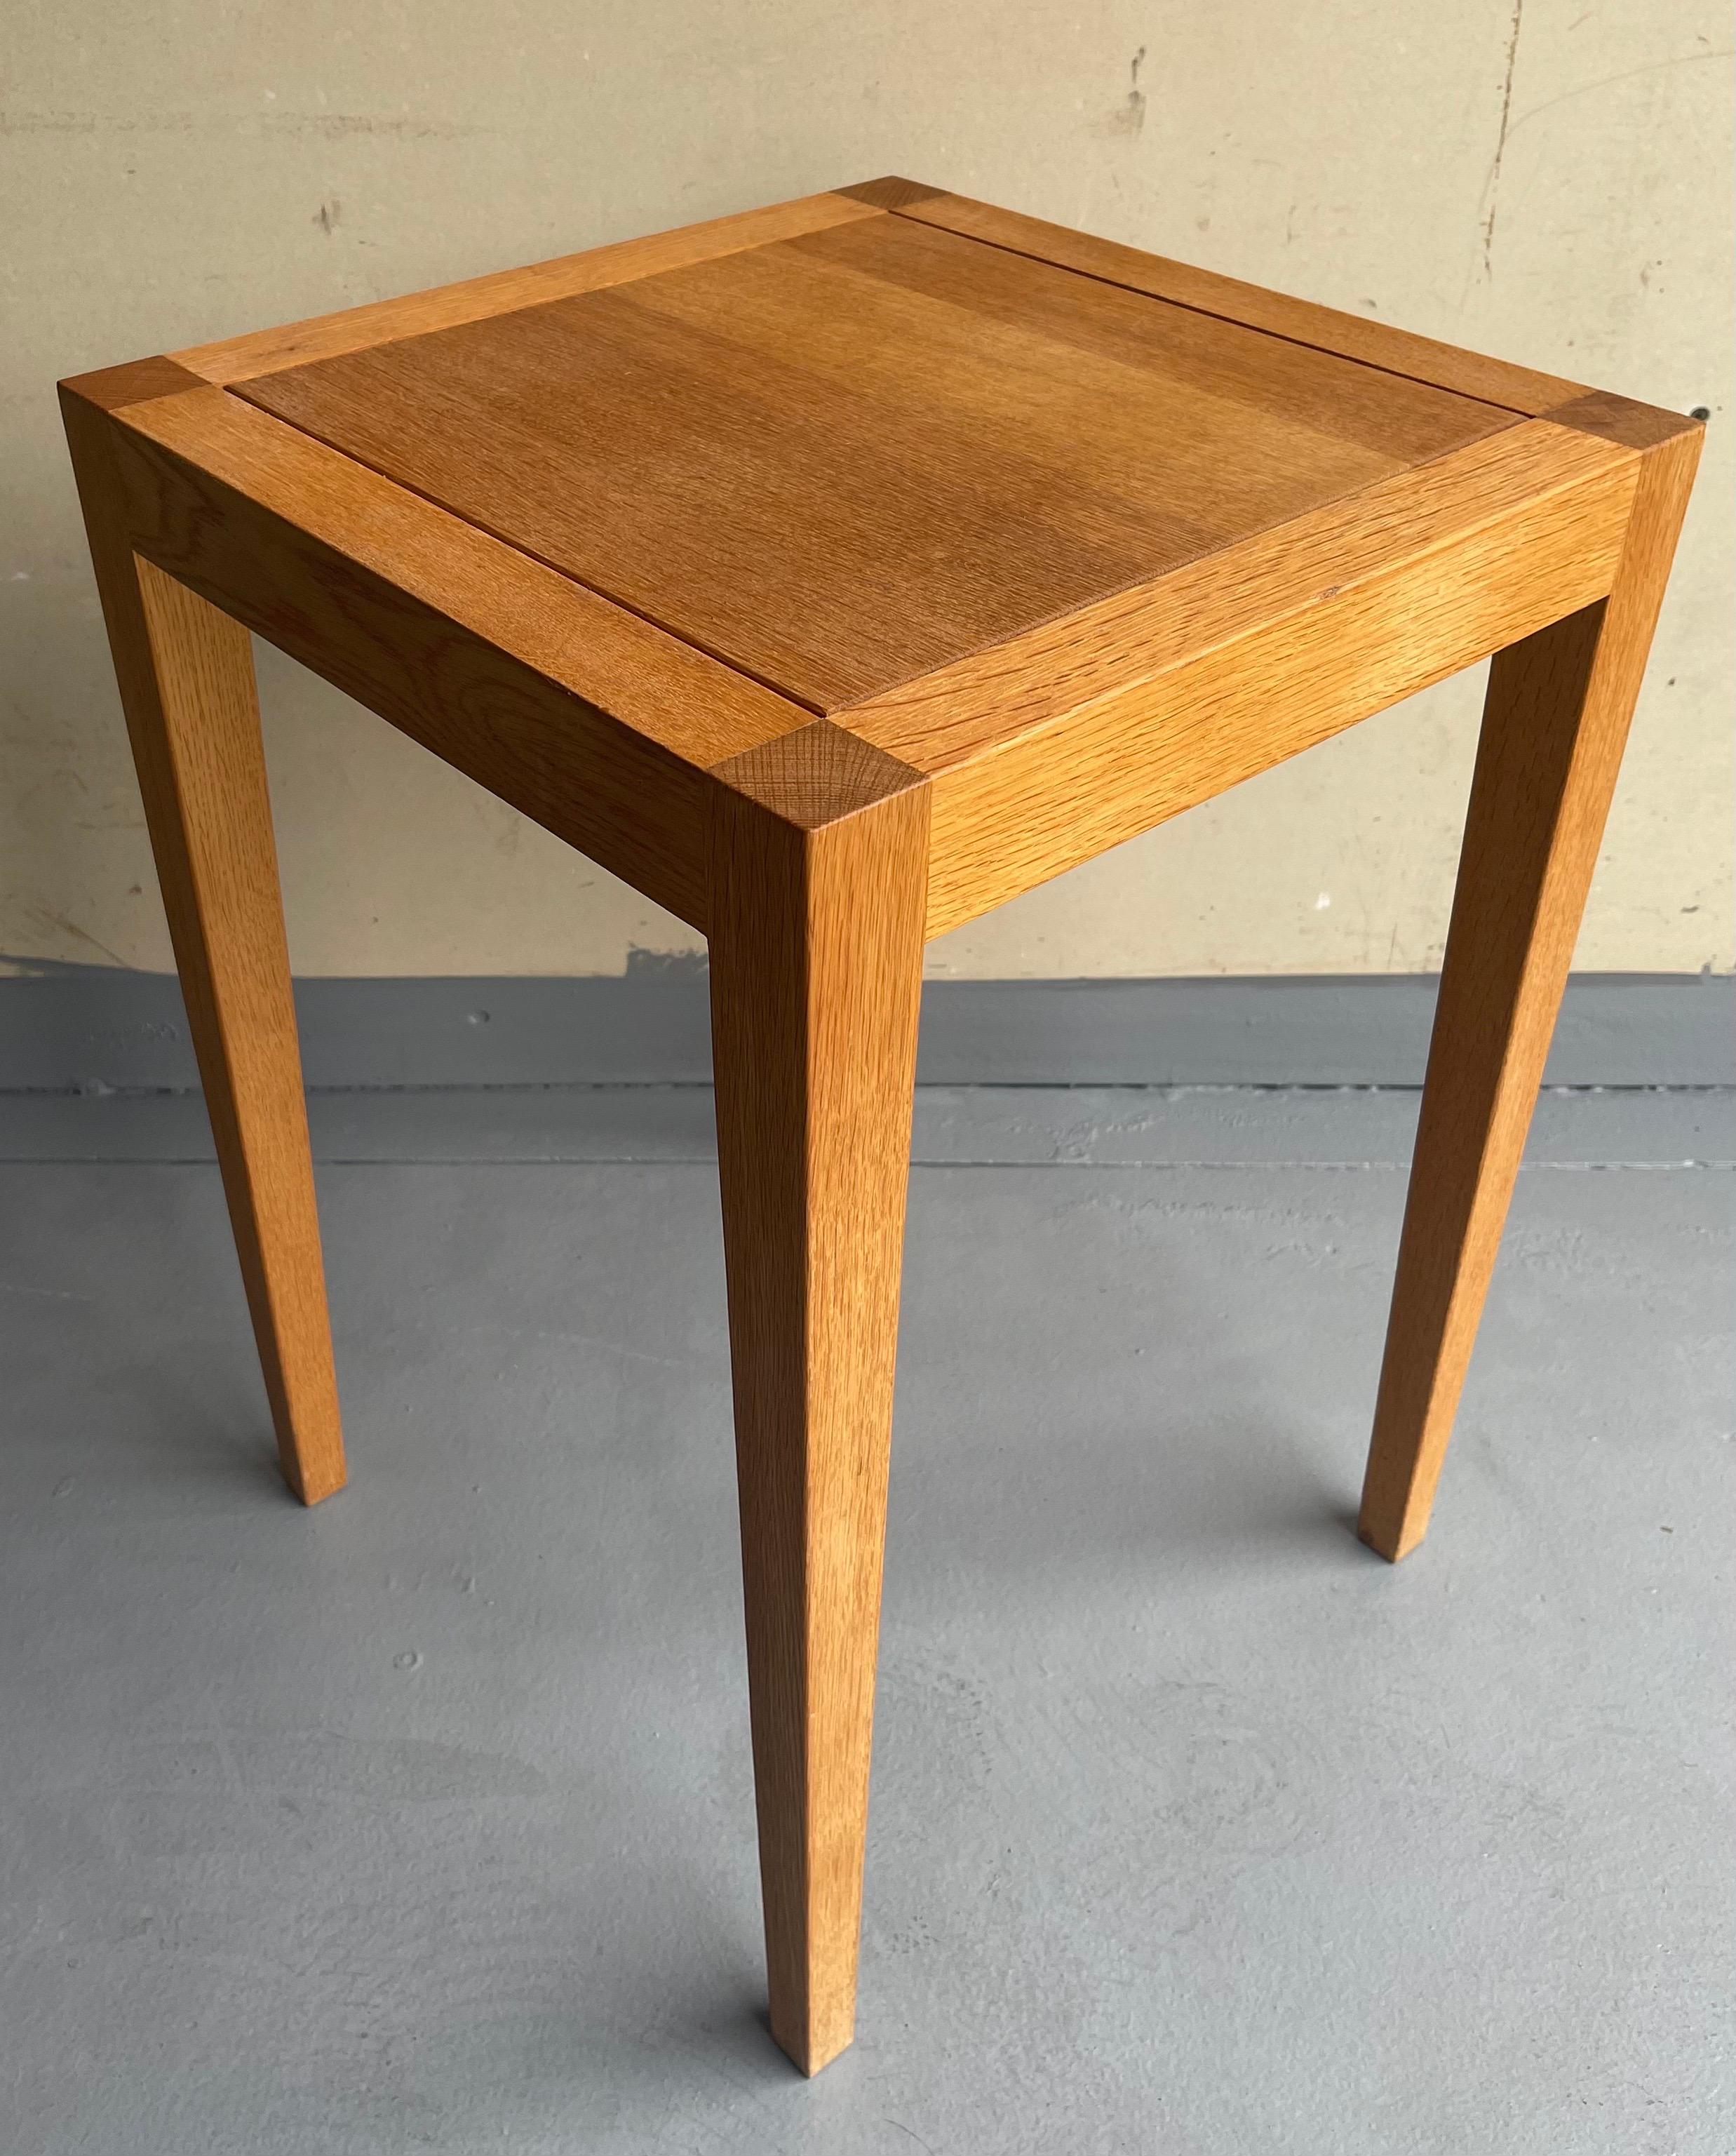 Pair of Organic Modern Square Nesting Tables by Gunther Lambert For Sale 1